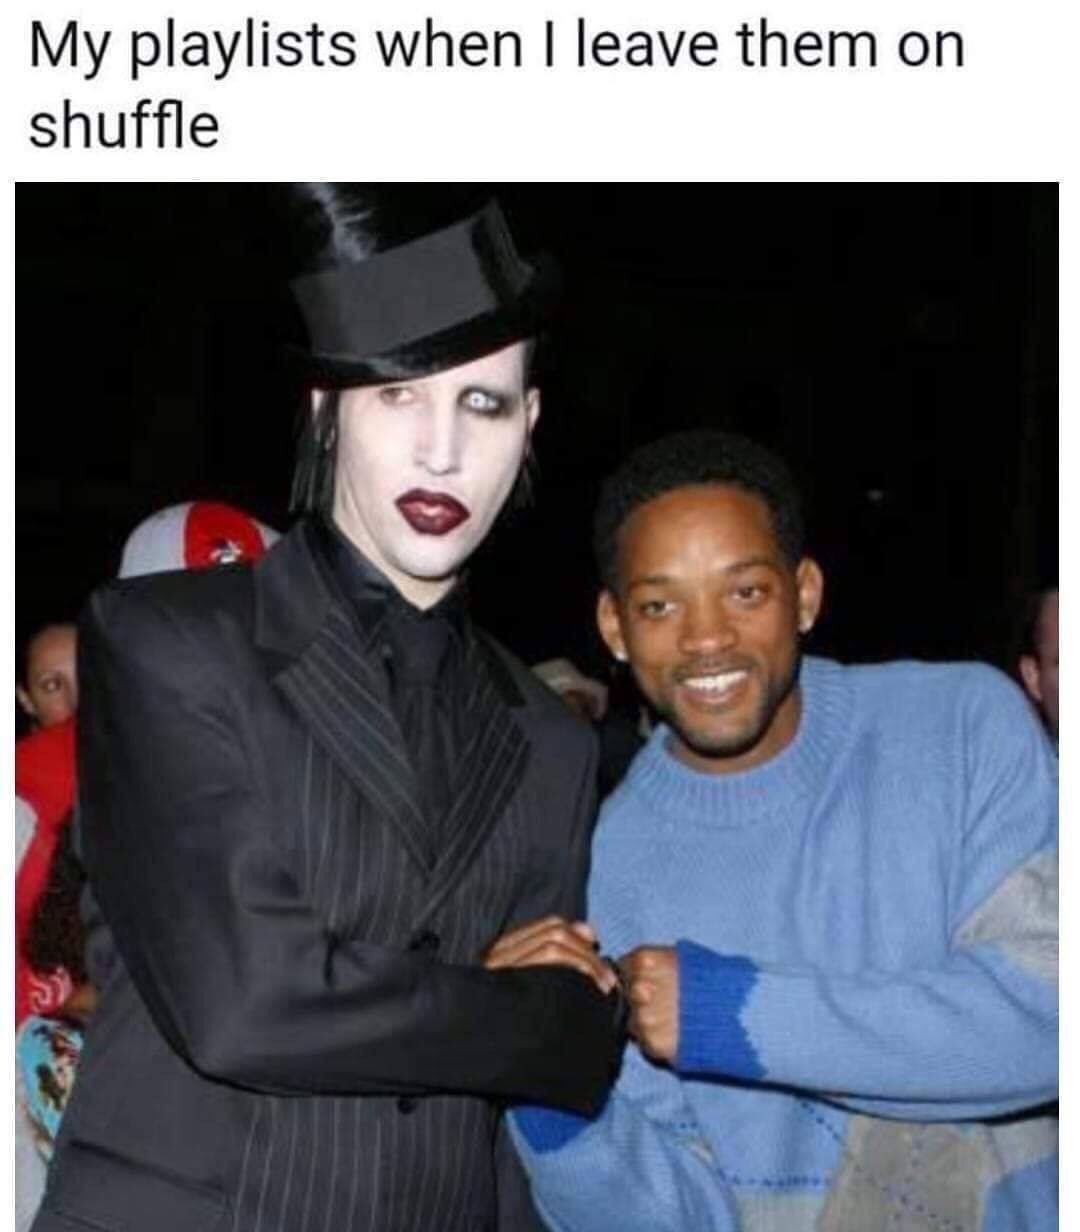 marilyn manson dave grohl - My playlists when I leave them on shuffle